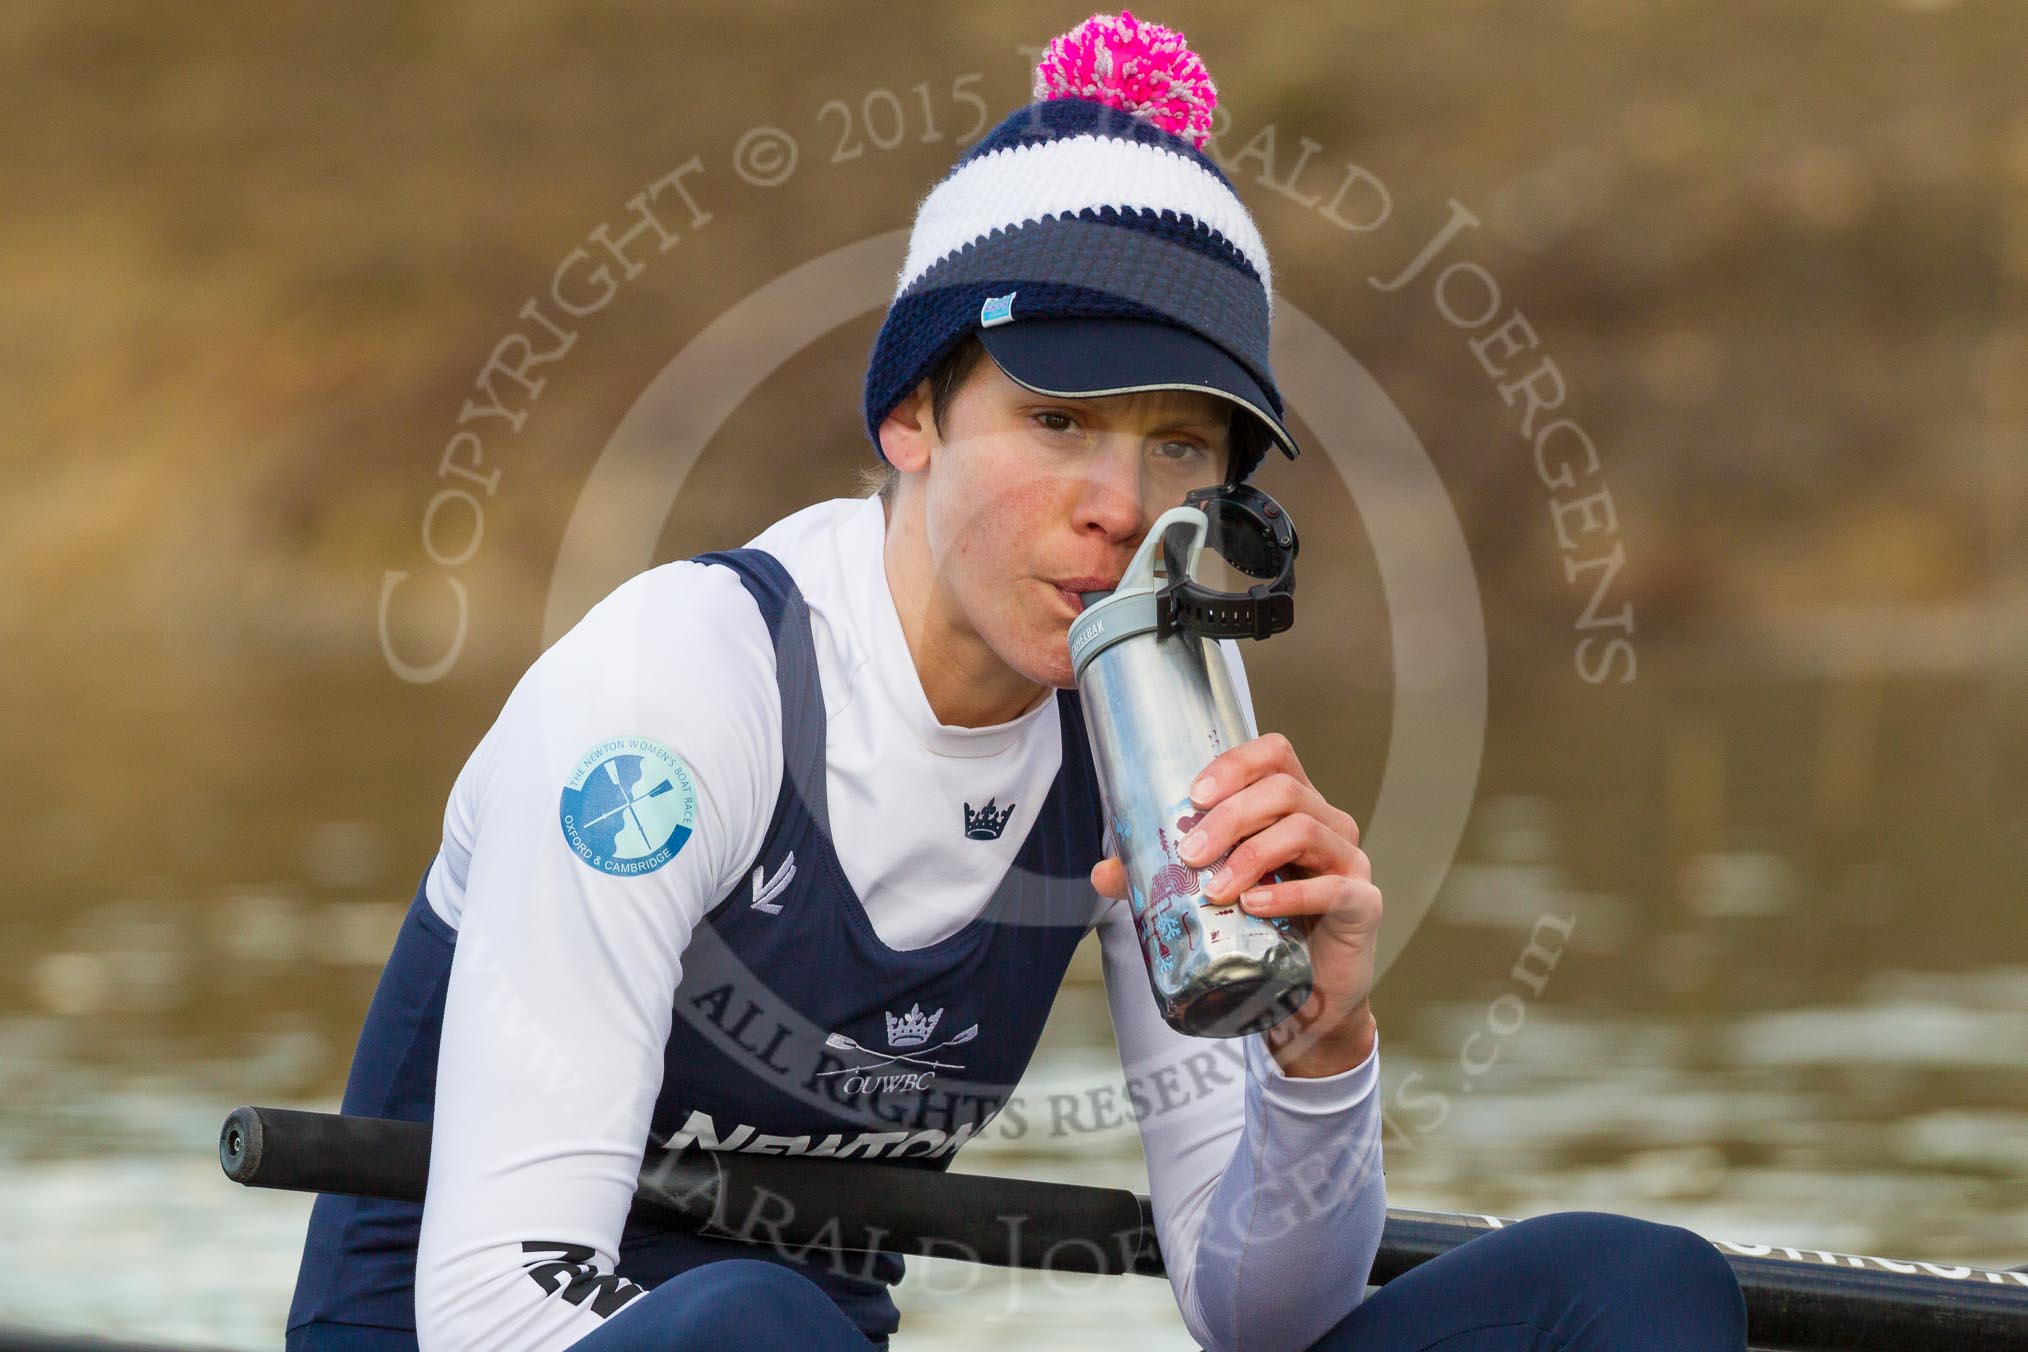 The Boat Race season 2015: OUWBC training Wallingford.

Wallingford,

United Kingdom,
on 04 March 2015 at 16:39, image #220